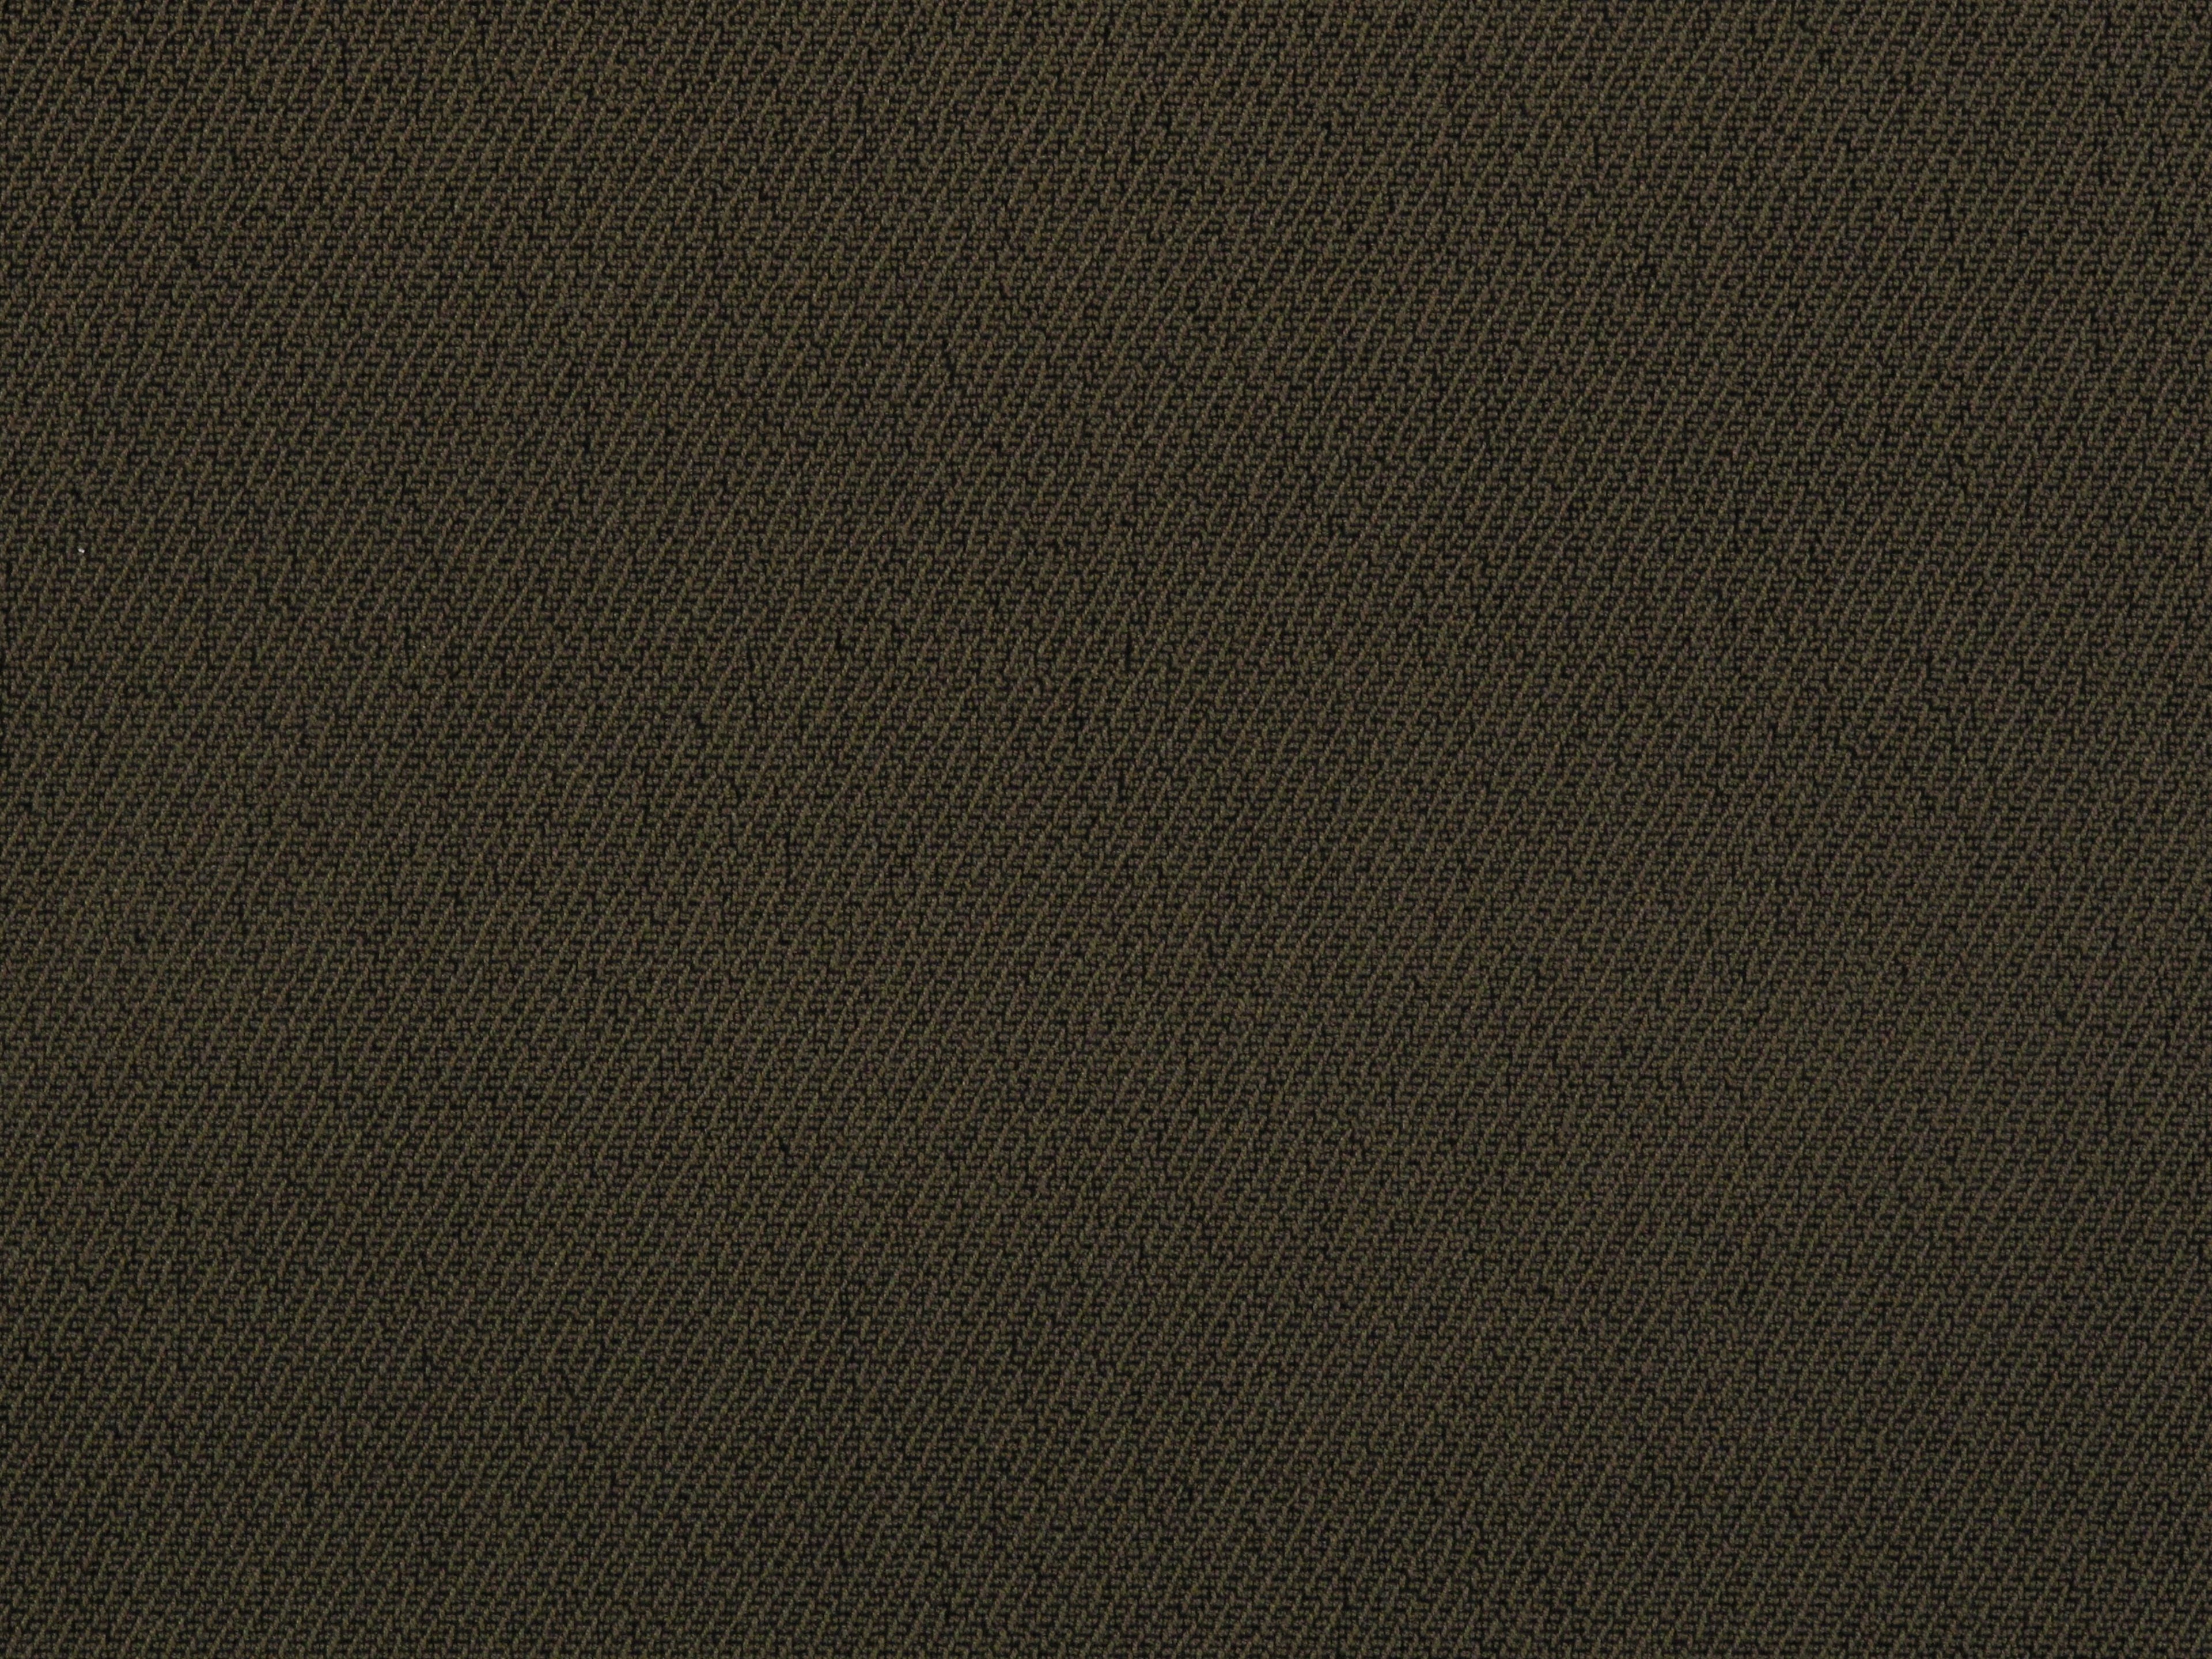 Brandenburg fabric in army green color - pattern number RH 00131314 - by Scalamandre in the Old World Weavers collection